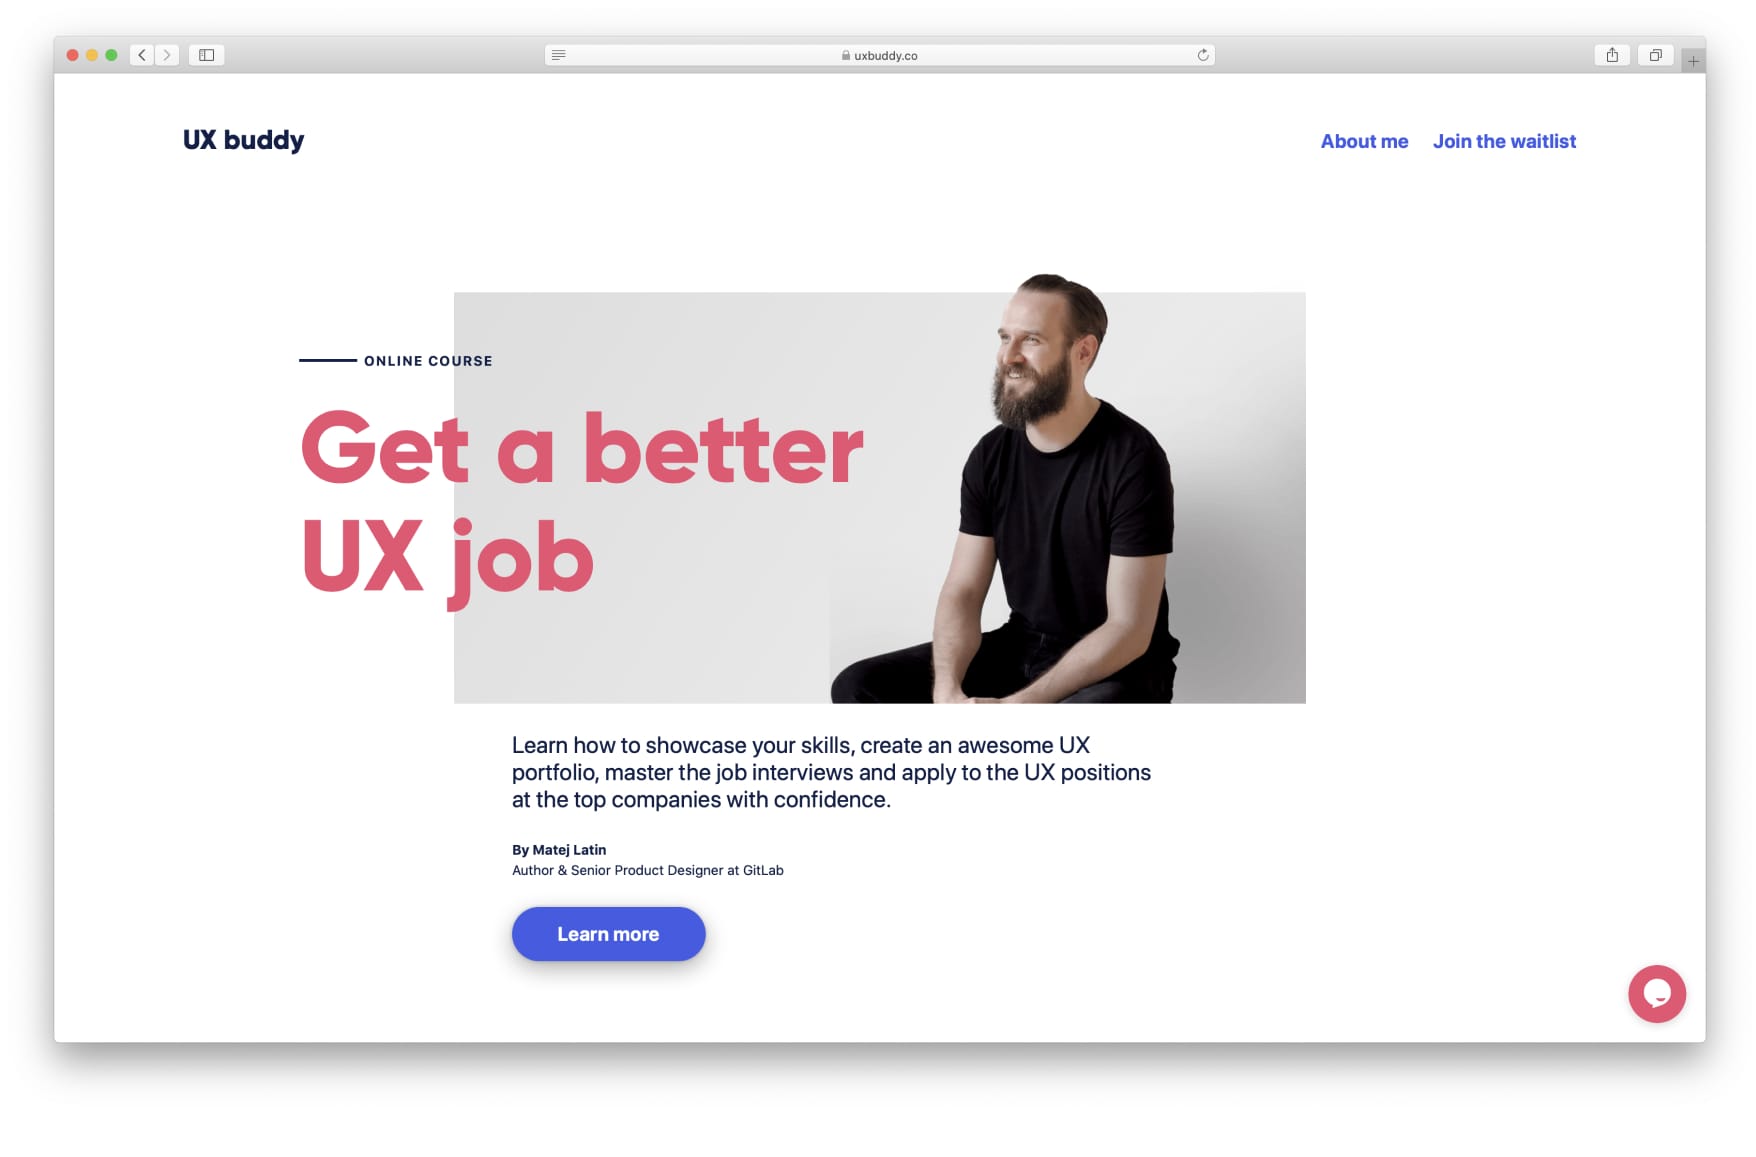 The finished website for UX Buddy